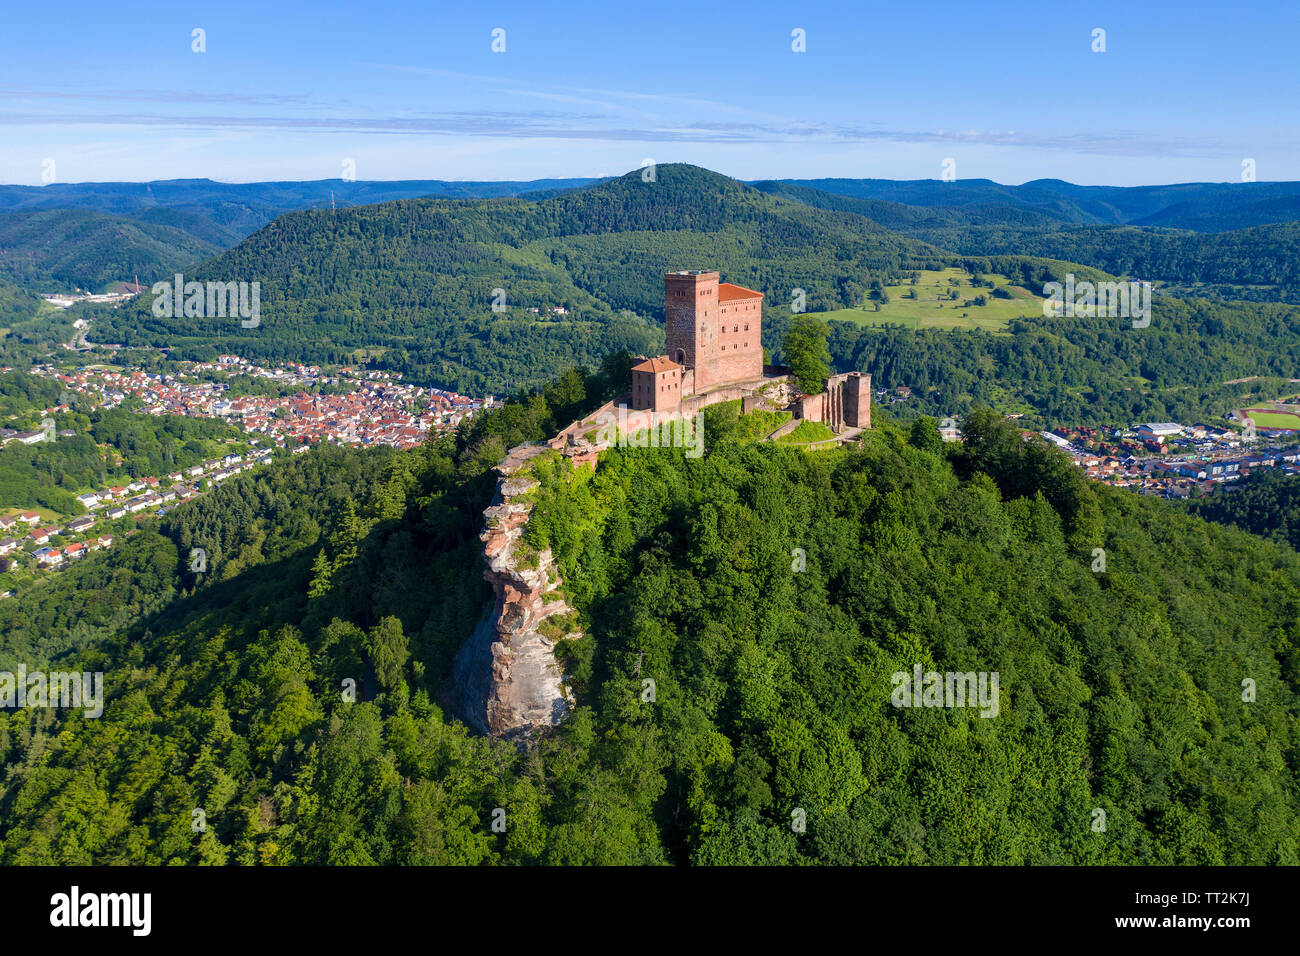 Aerial view of the Imperial castle Trifels, where Richard the Lionheart was imprisoned,  Annweiler at Trifels, Rhineland-Palatinate, Germany Stock Photo